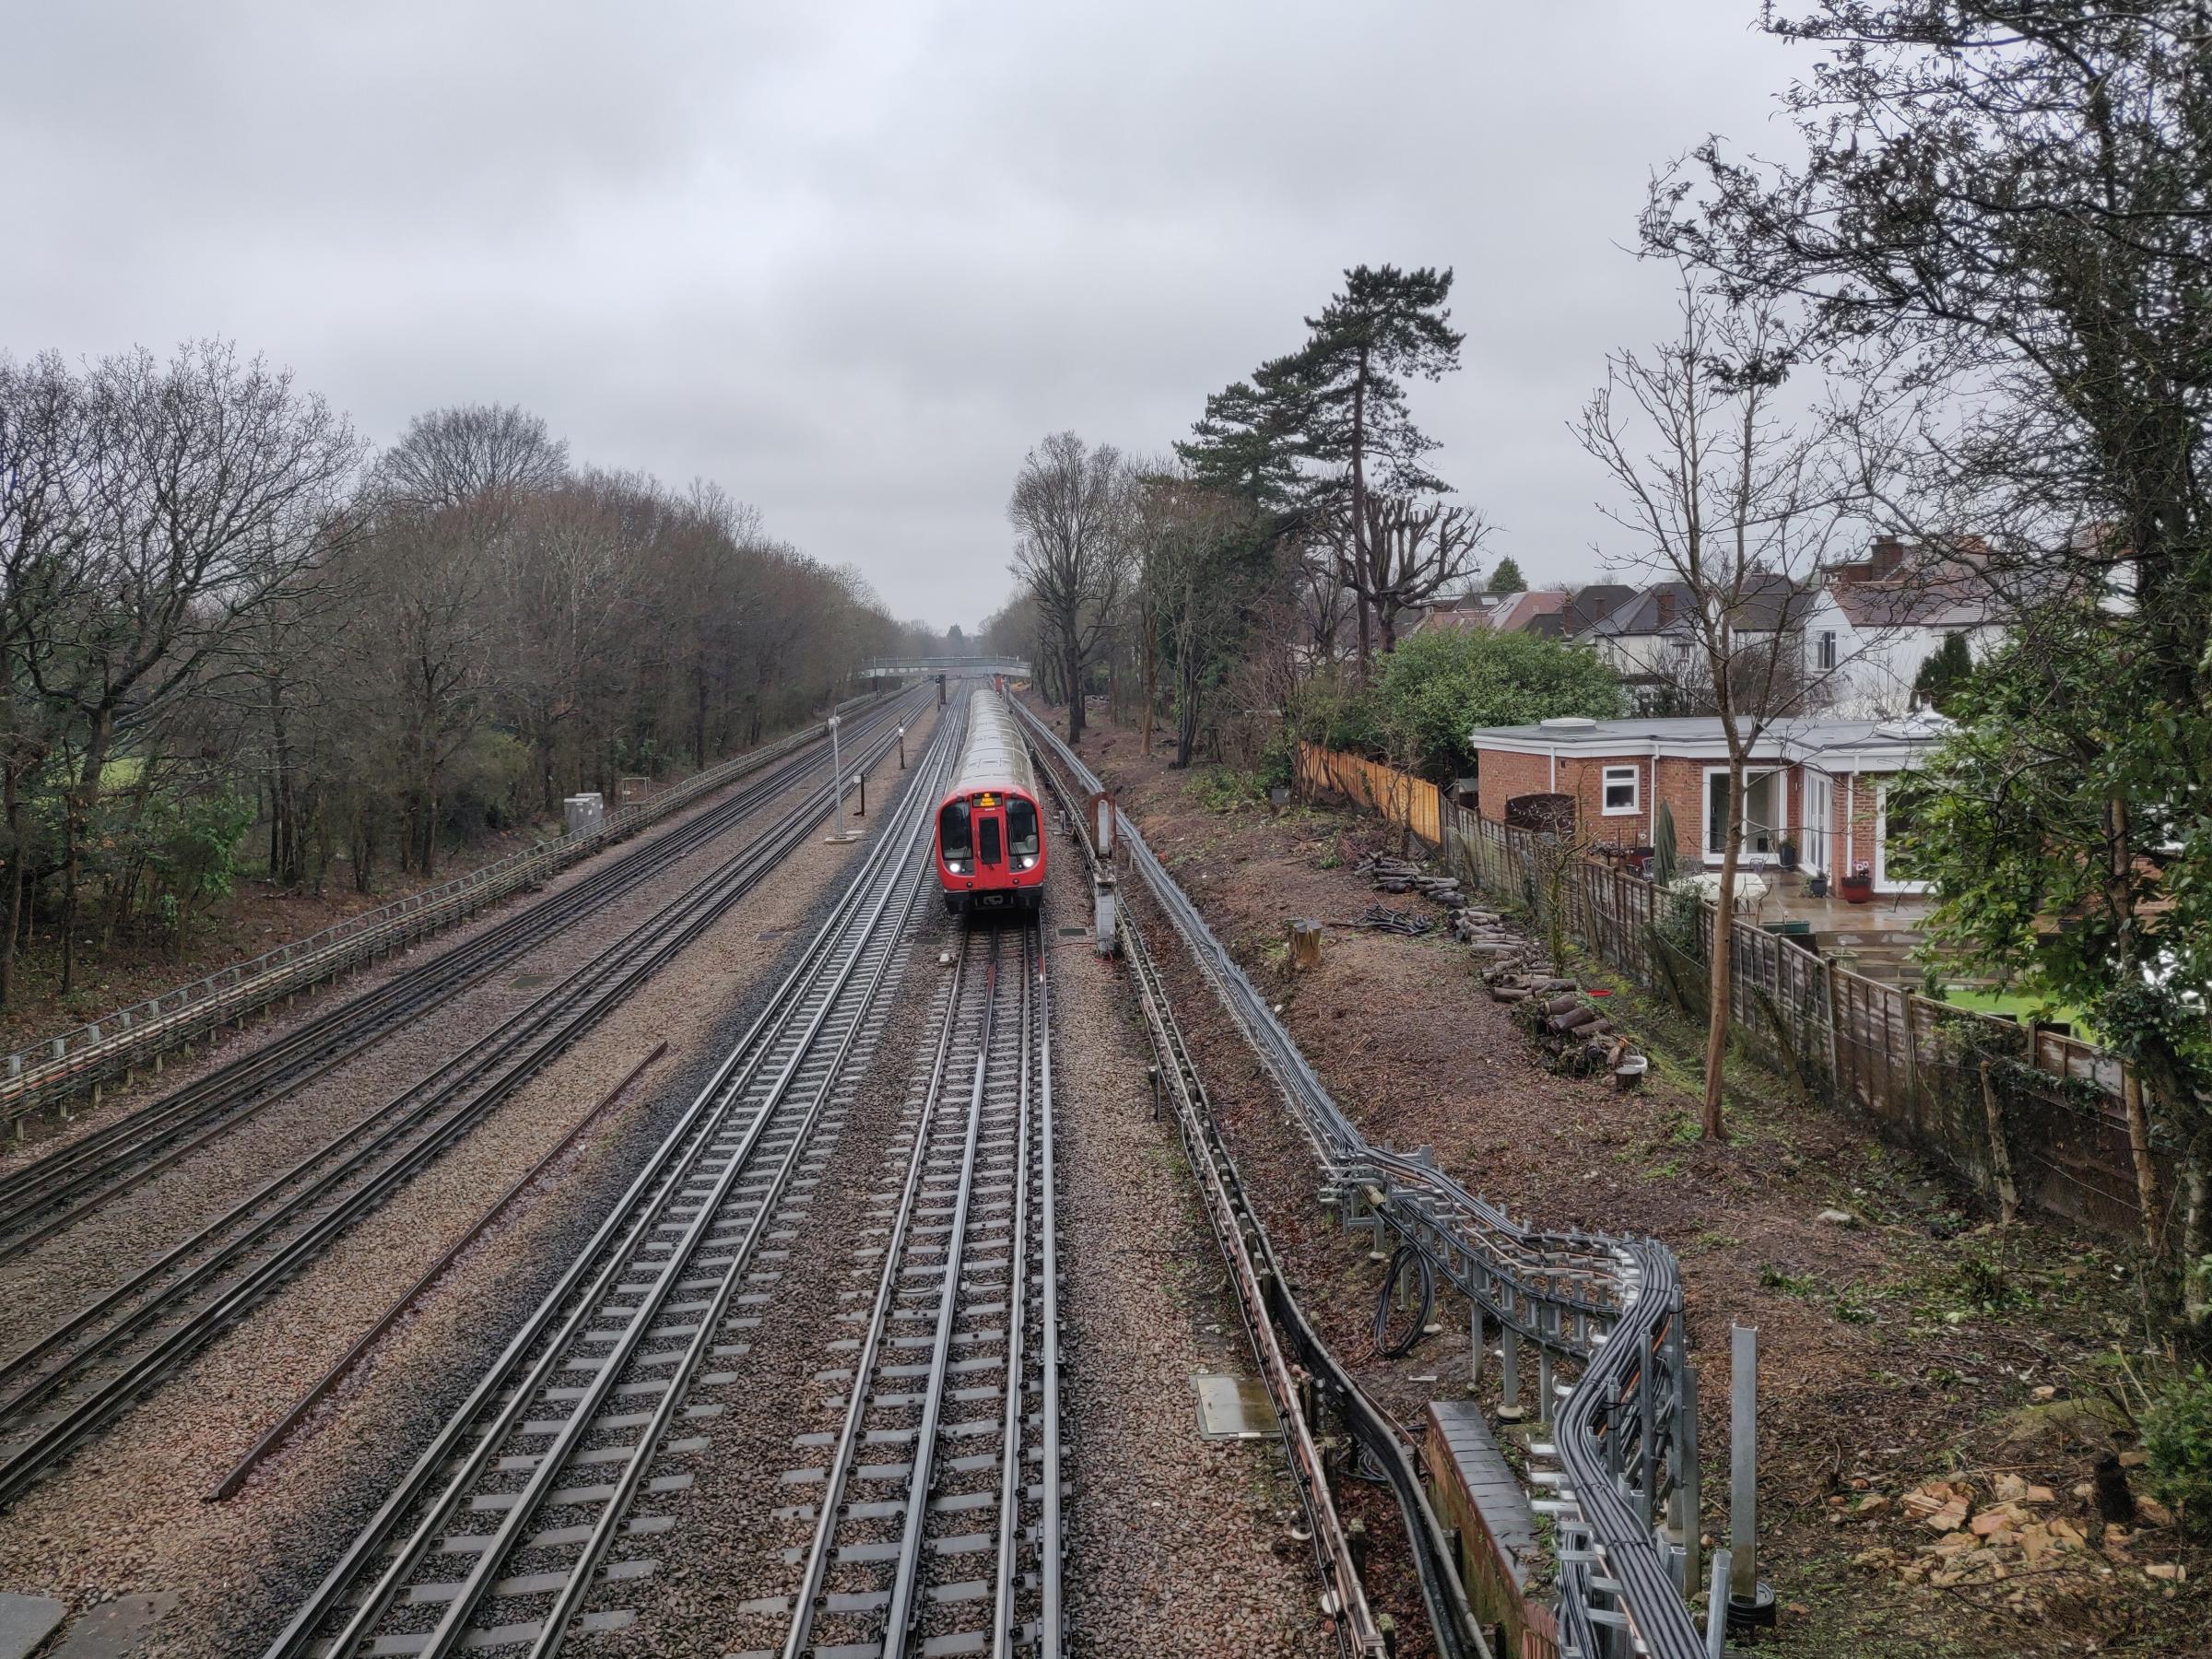 Parts of the Metropolitan line run close to peoples homes